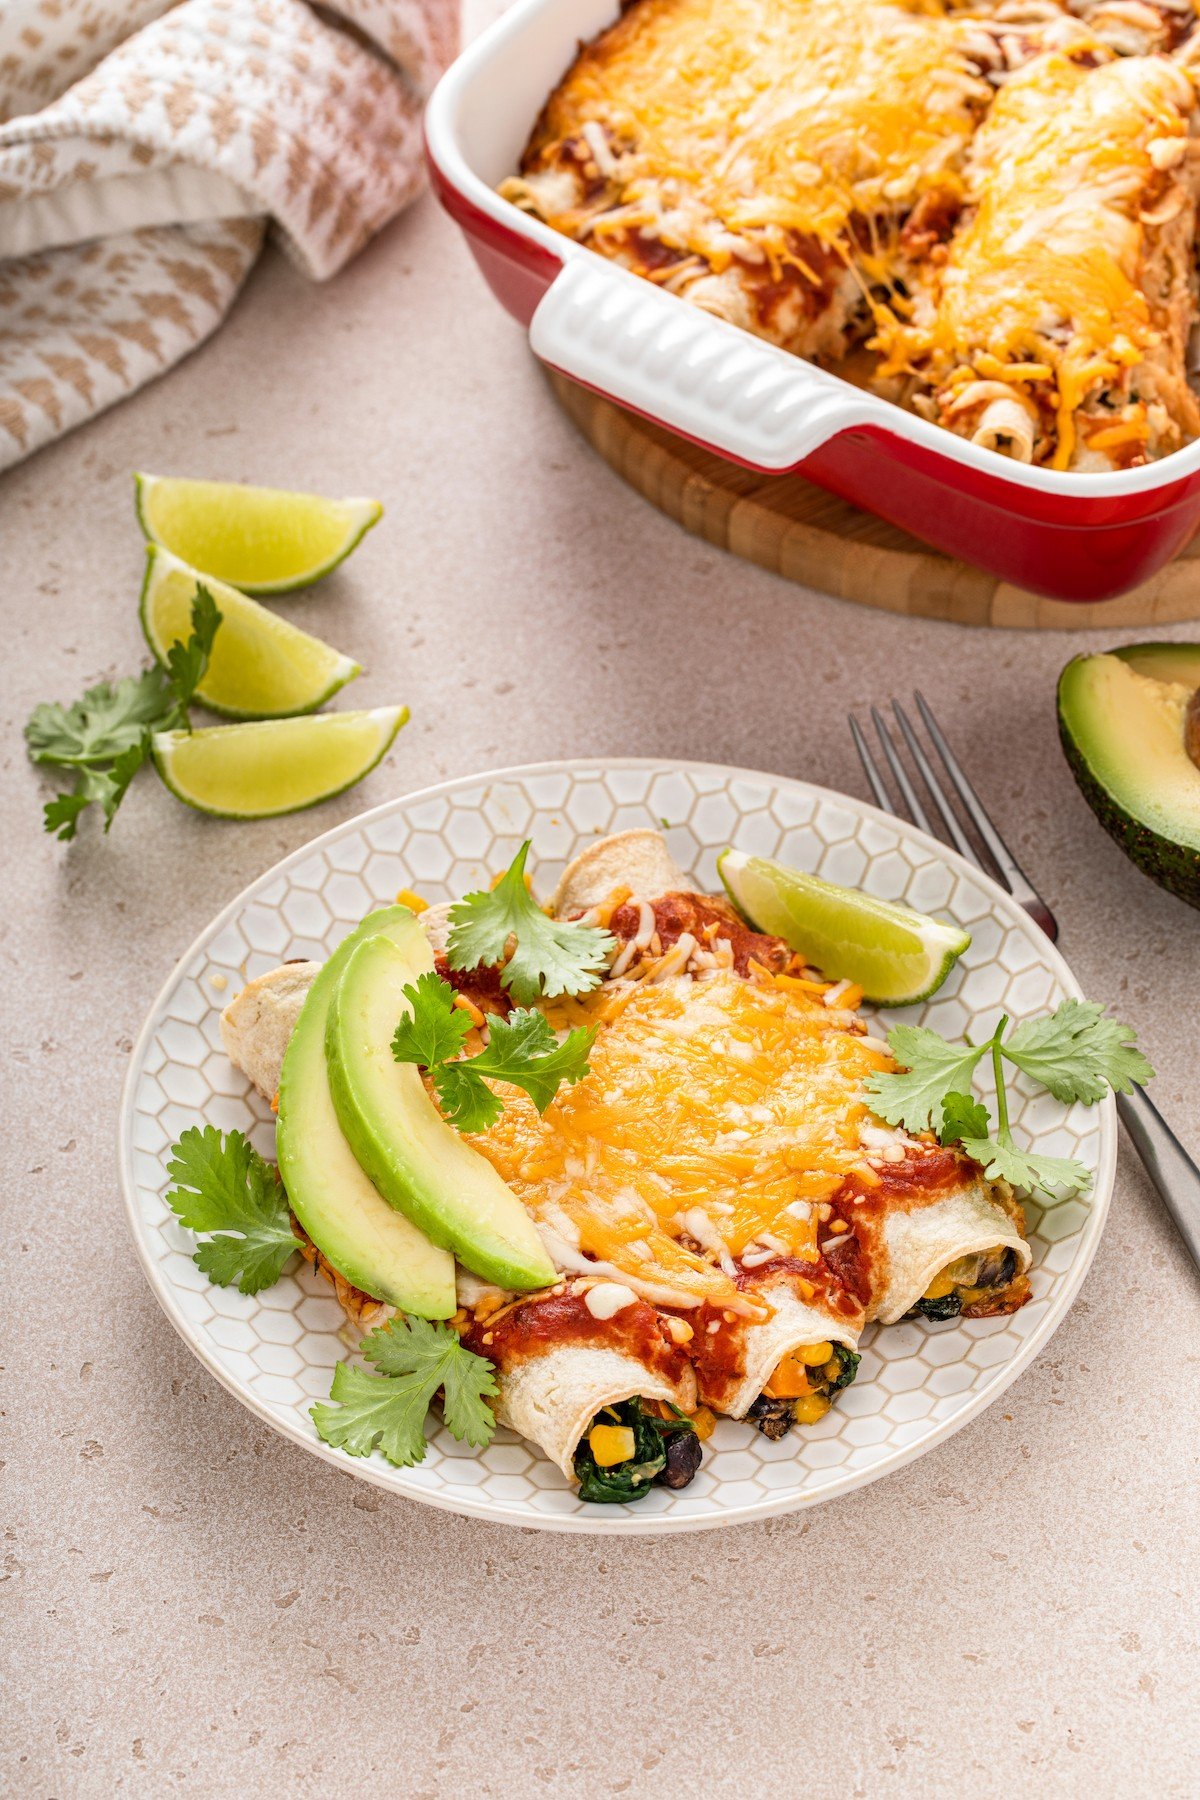 Three vegetable enchiladas on a plate with avocado slices